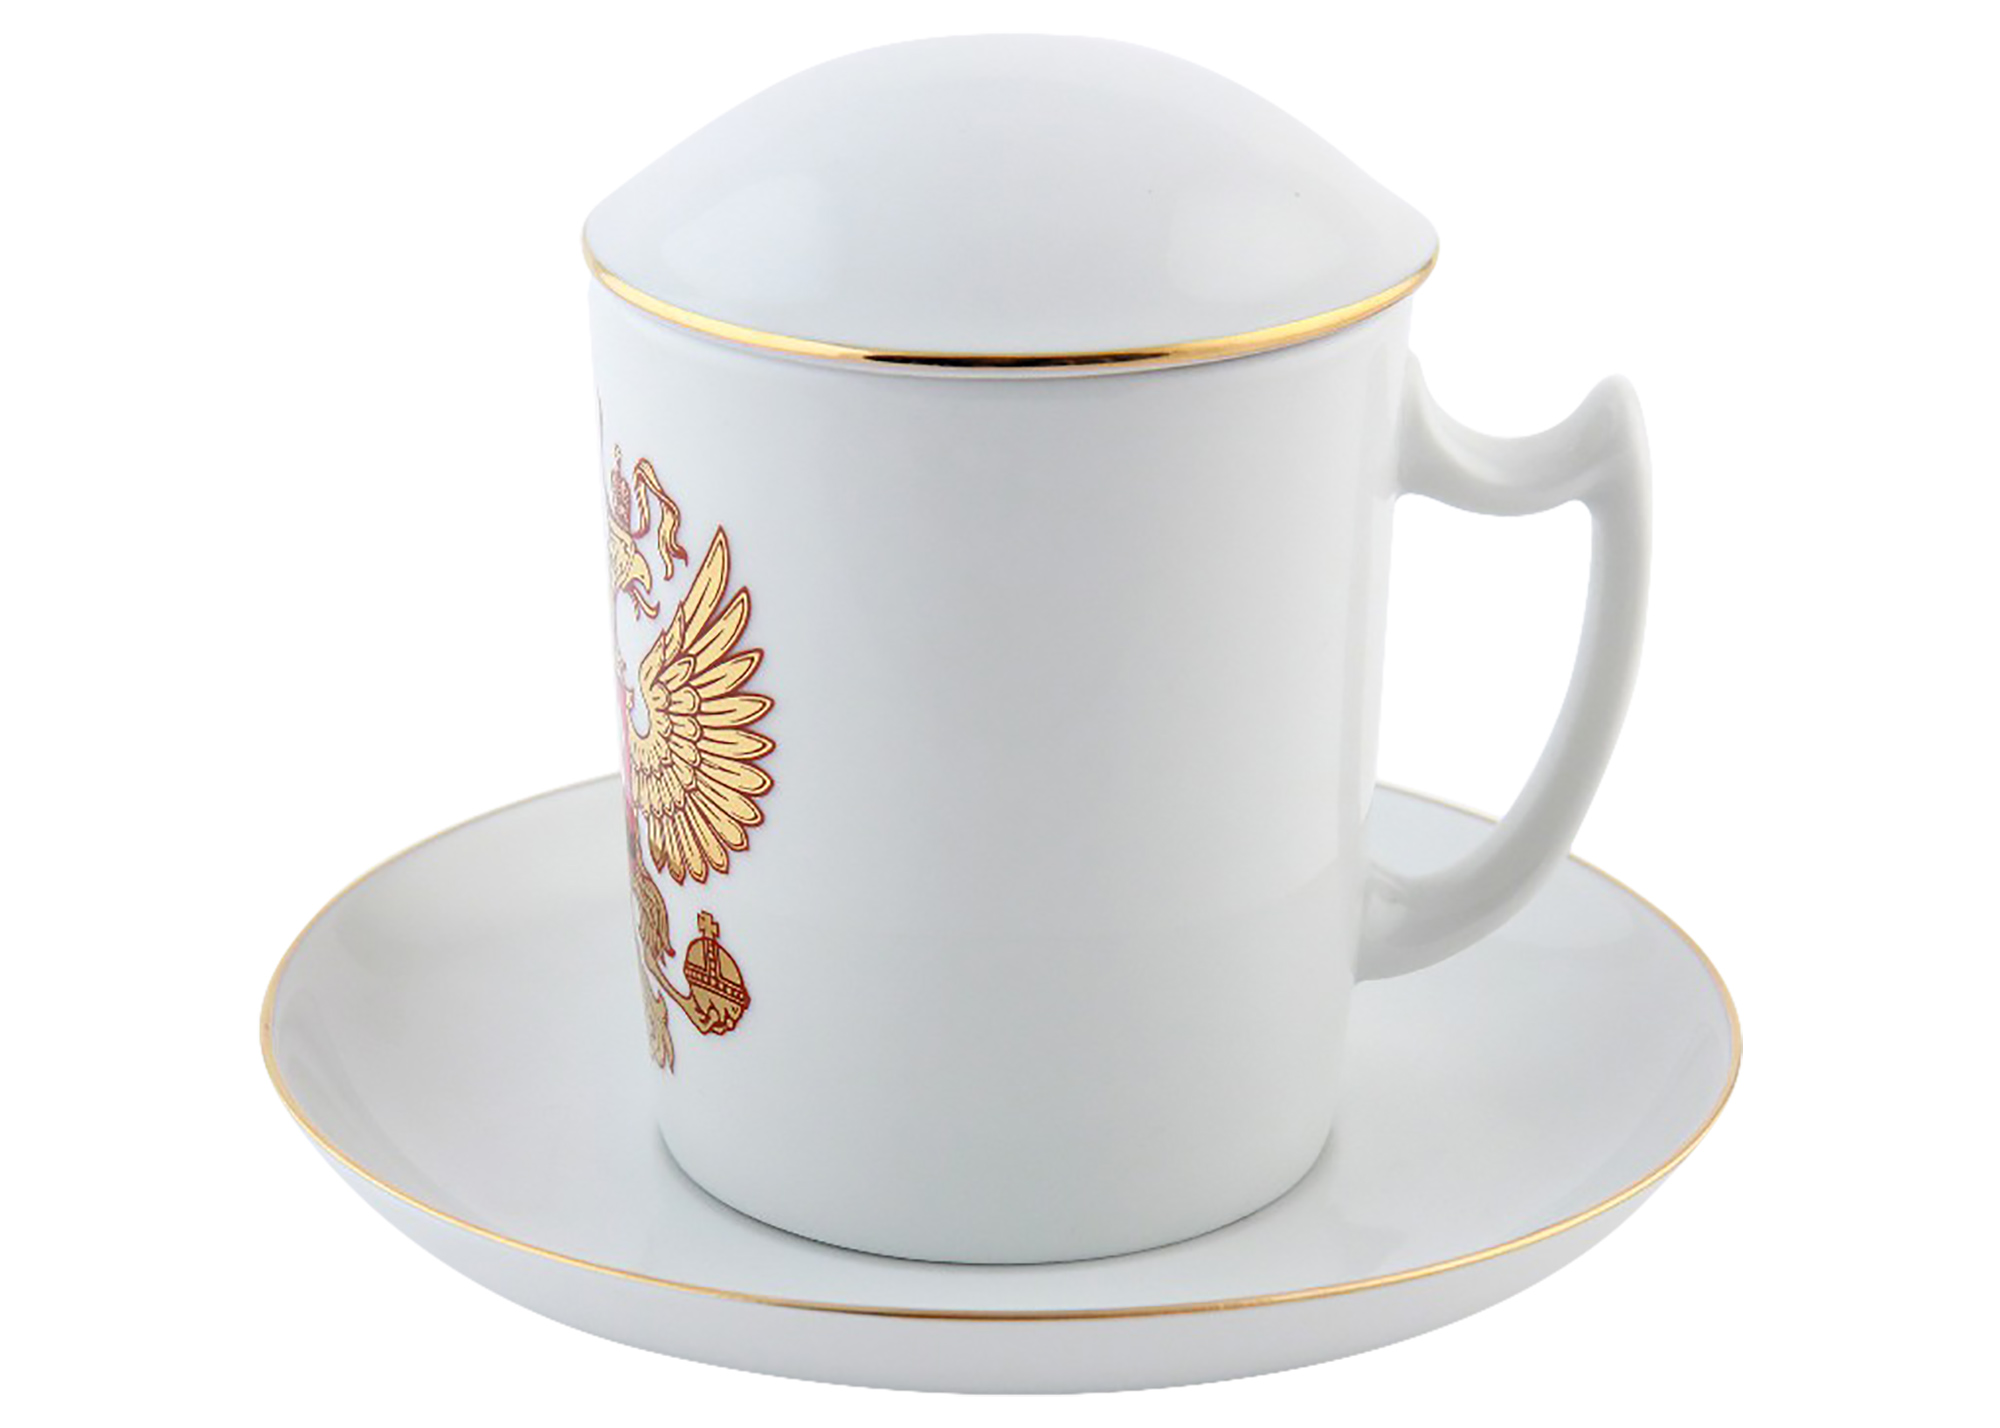 Buy Russian Coat of Arms Double-Headed Eagle Covered Mug and Saucer at GoldenCockerel.com